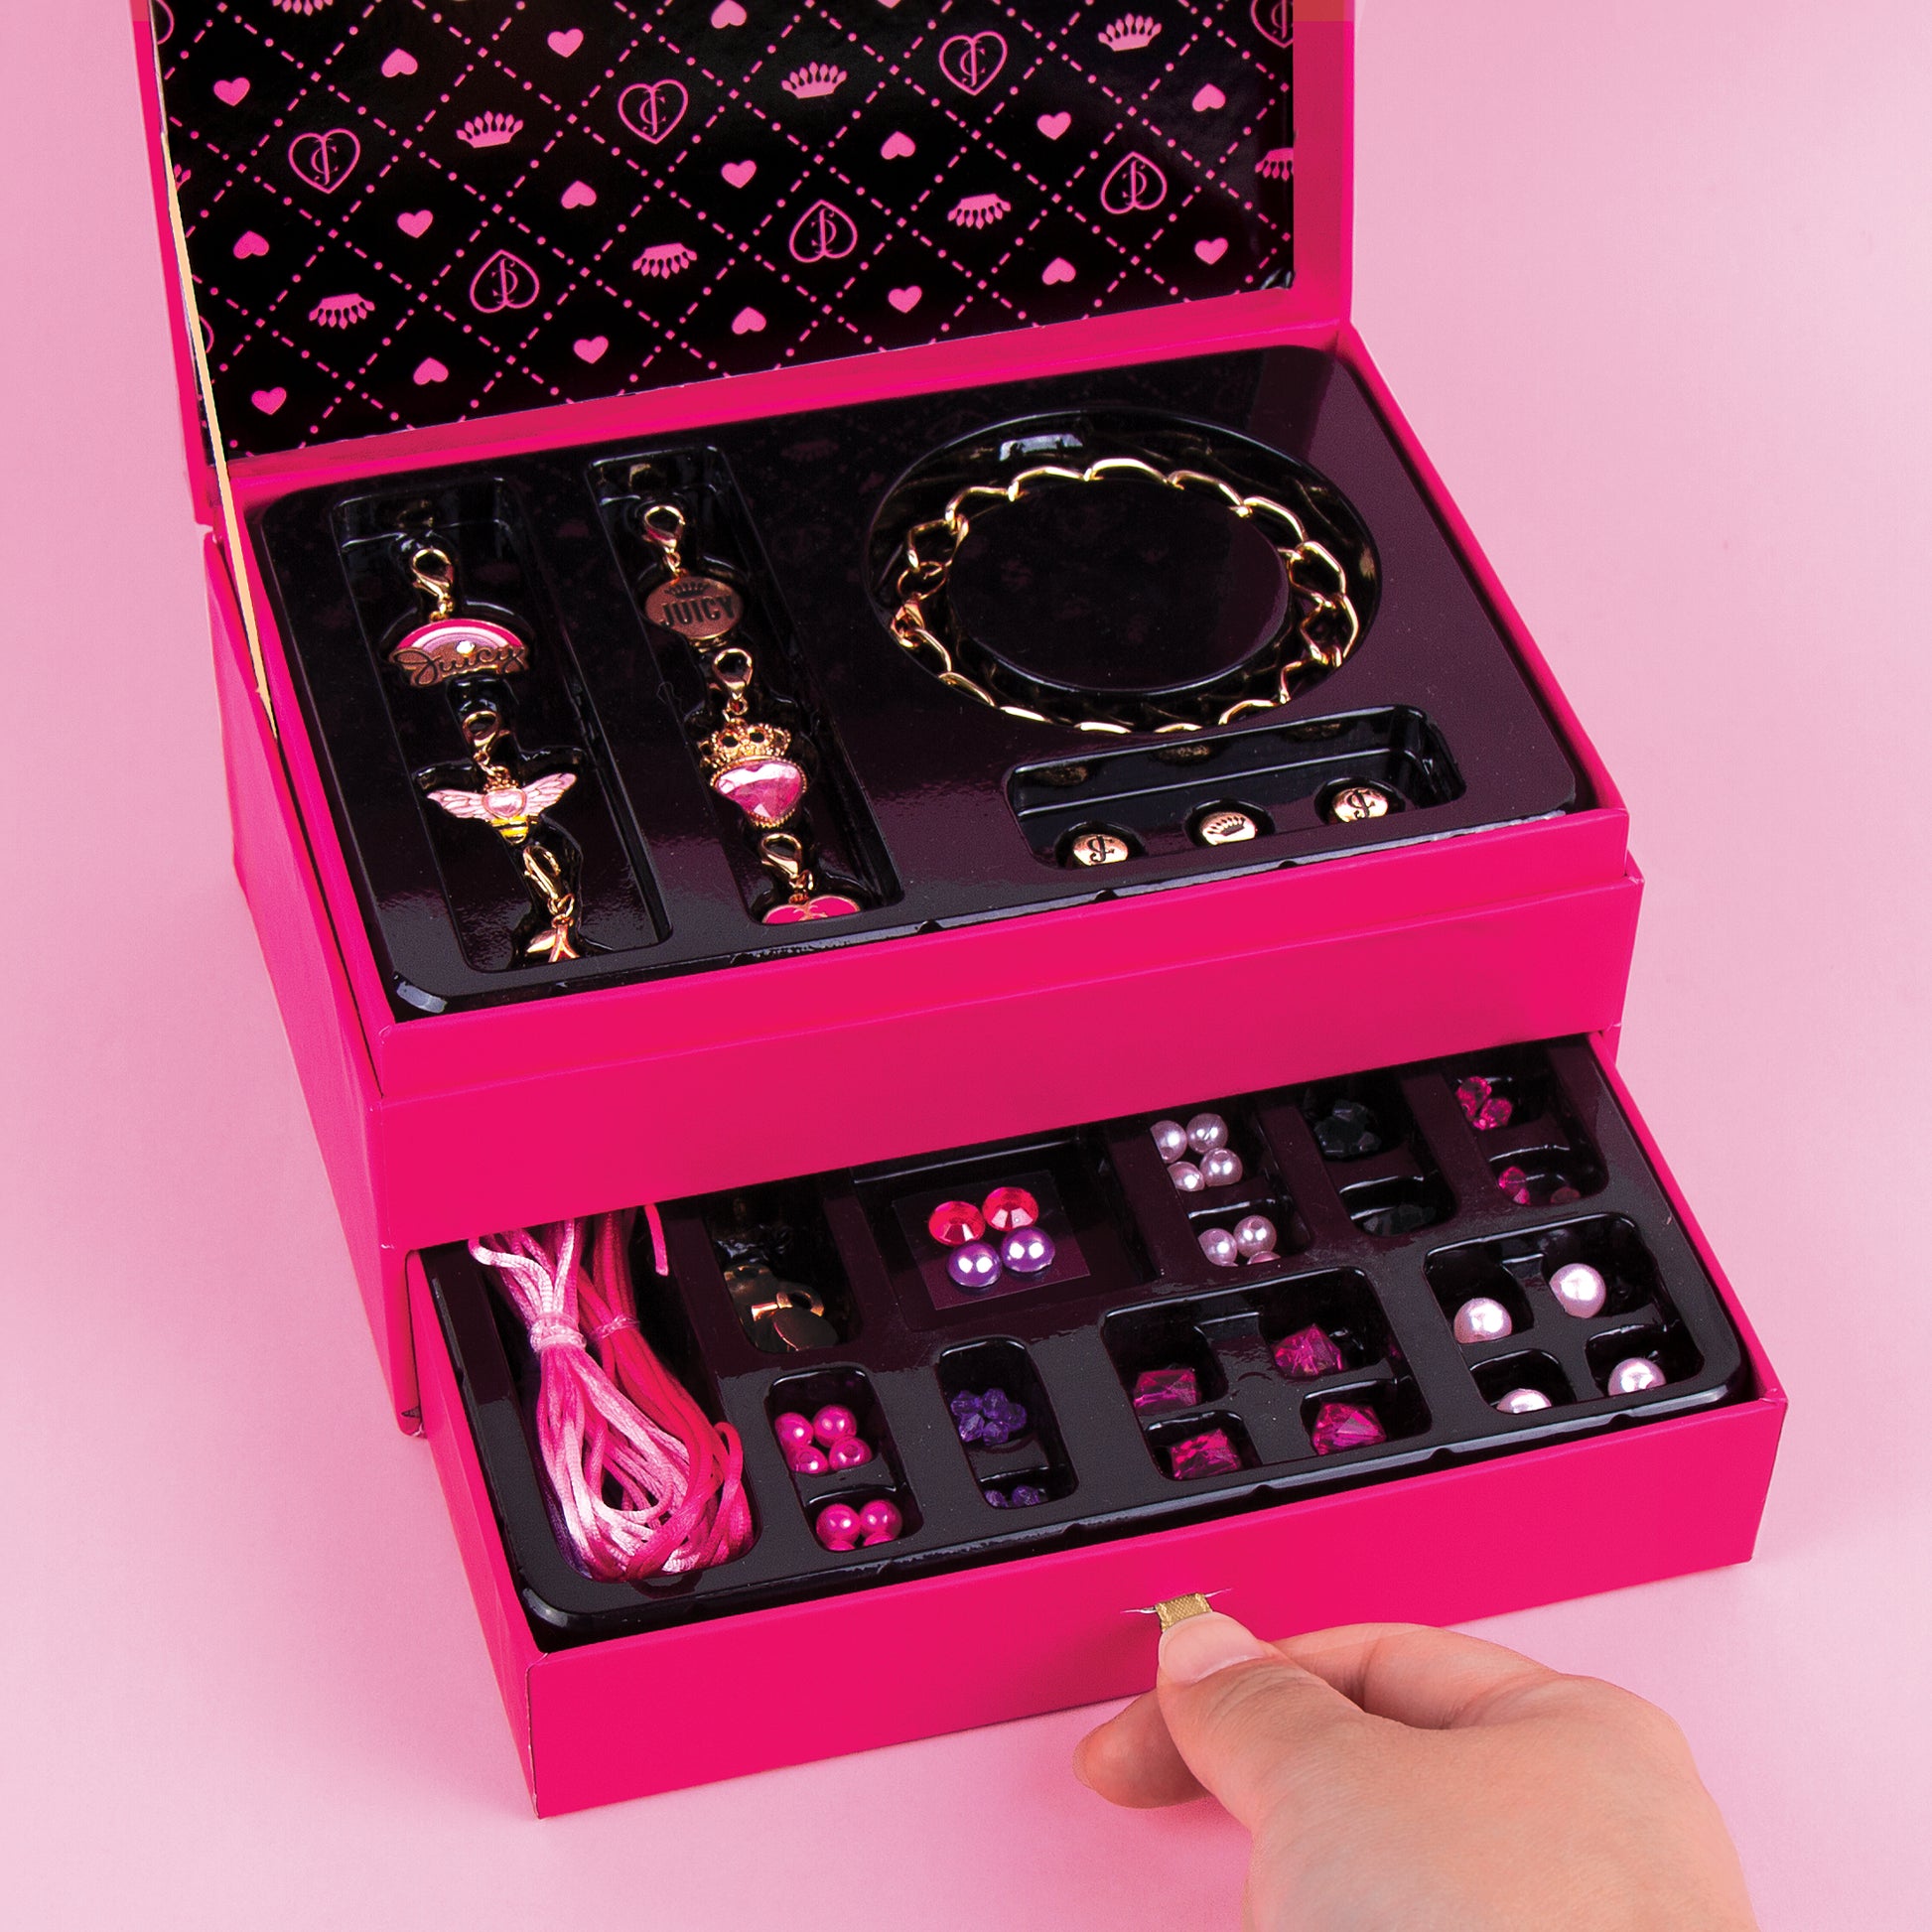 Juicy Couture Jewelry 